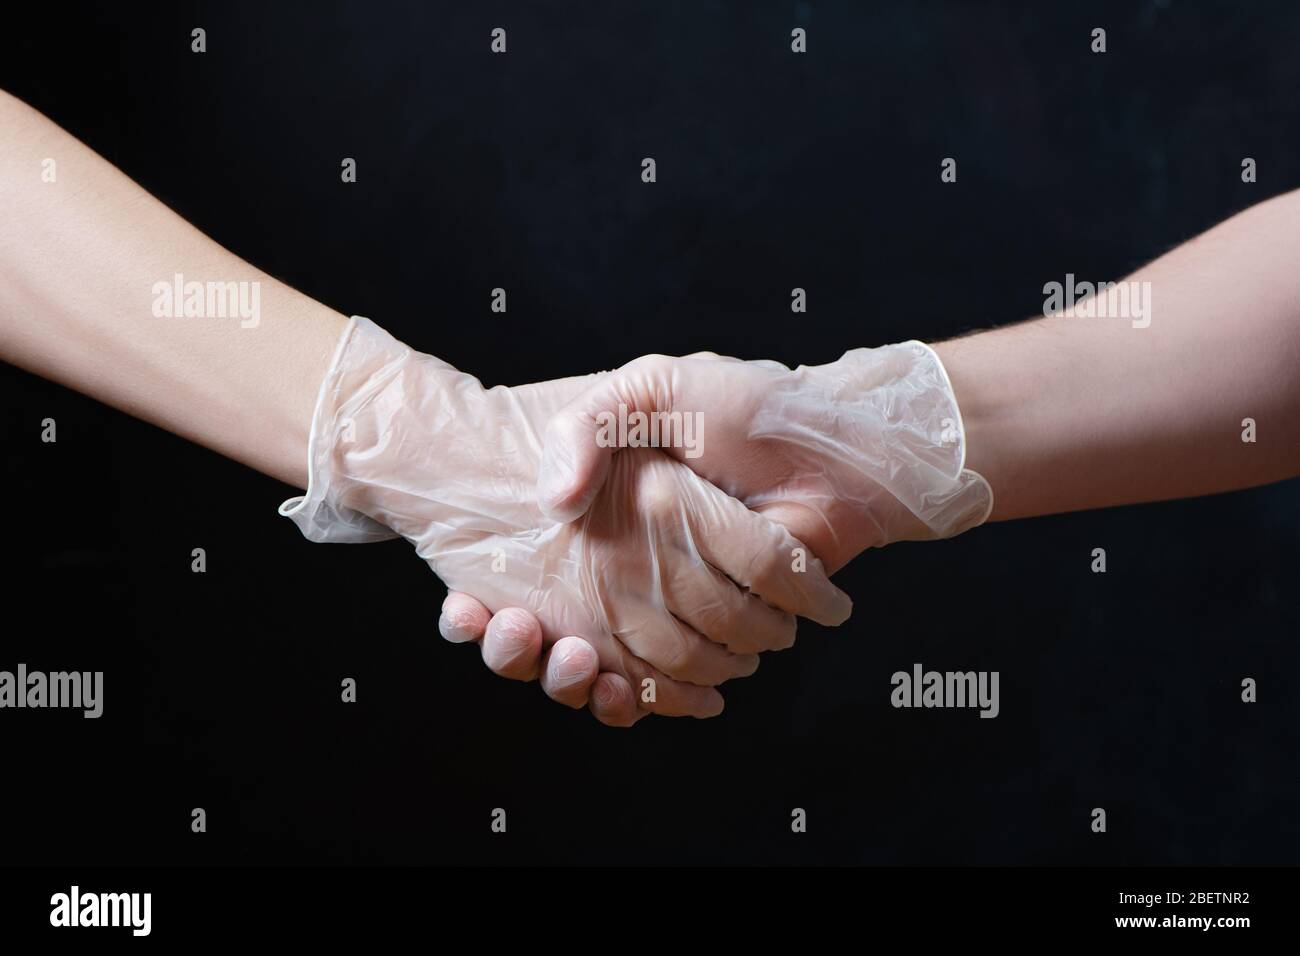 Handshake in medical gloves on black background. Partial view. Stock Photo